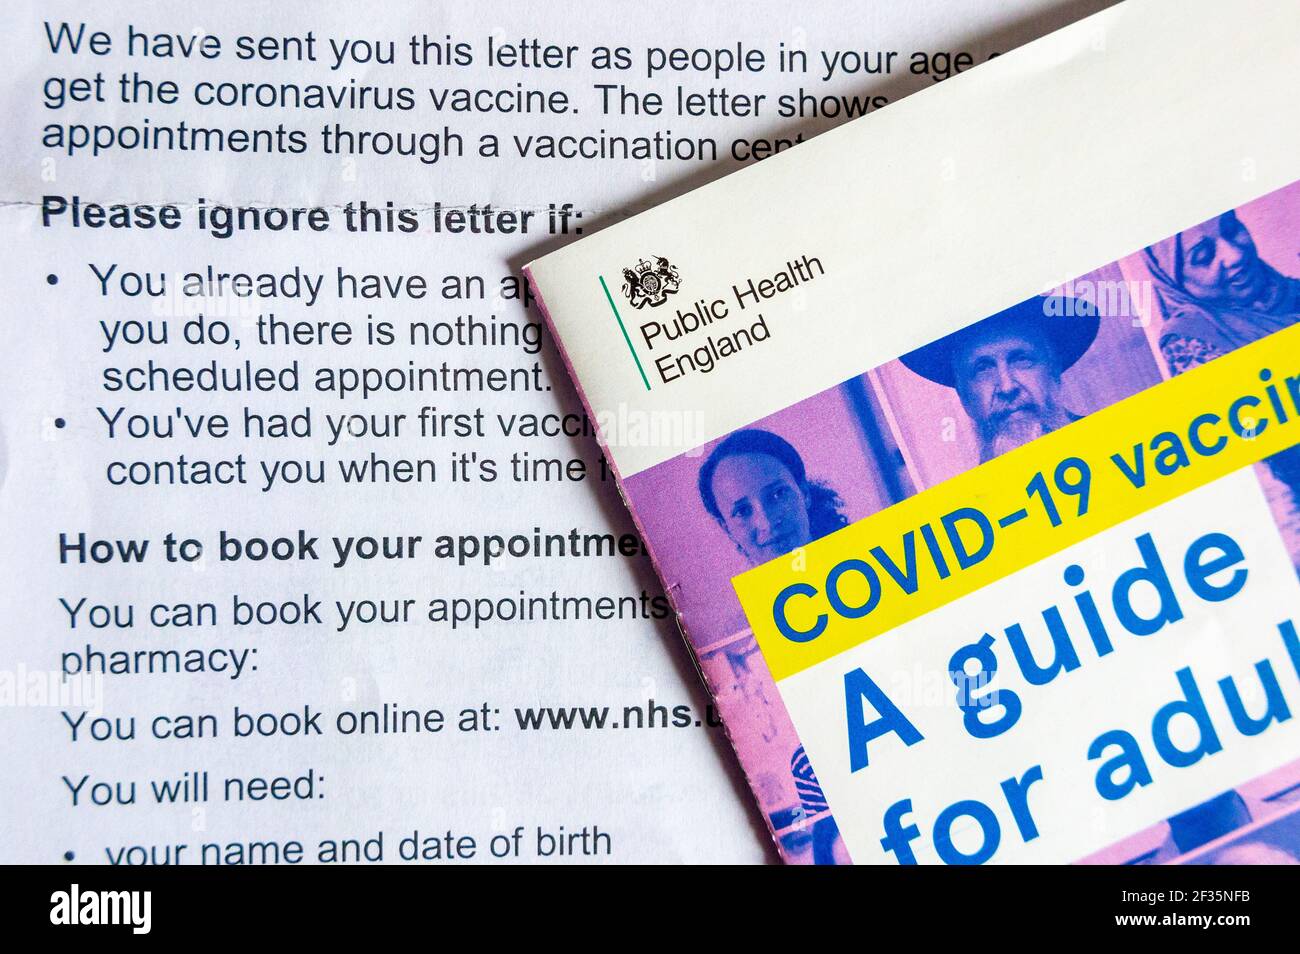 Leaflet Covid-19 Vaccination A Guide for Adults sent by Public Health England with letter explaining how to book coronavirus vaccination in March 2021 Stock Photo